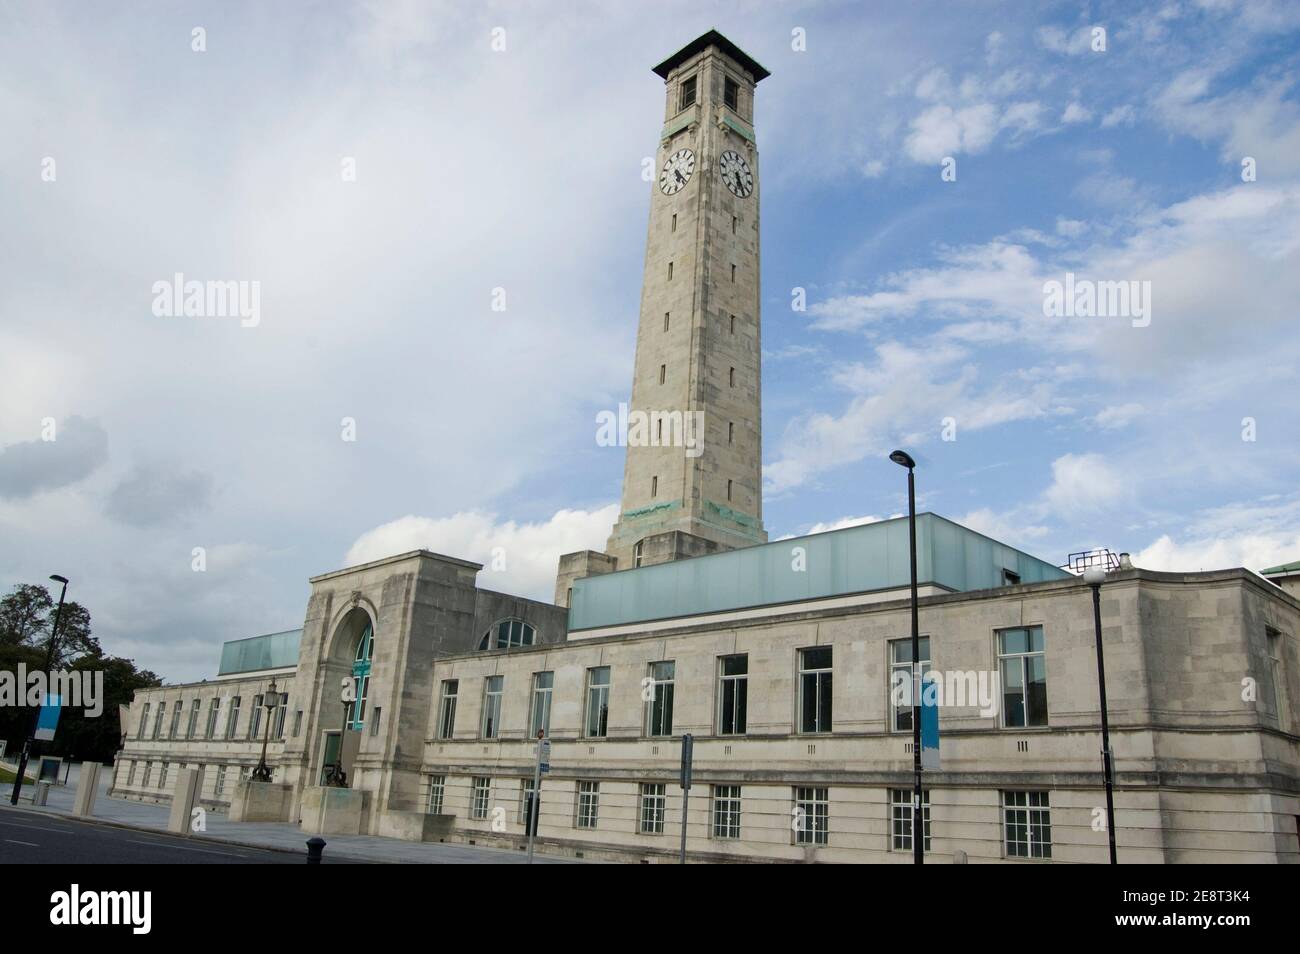 Western facade of Southampton's Civic Centre. The art deco style building is home to a library, theatre and museum as well as council offices. Stock Photo